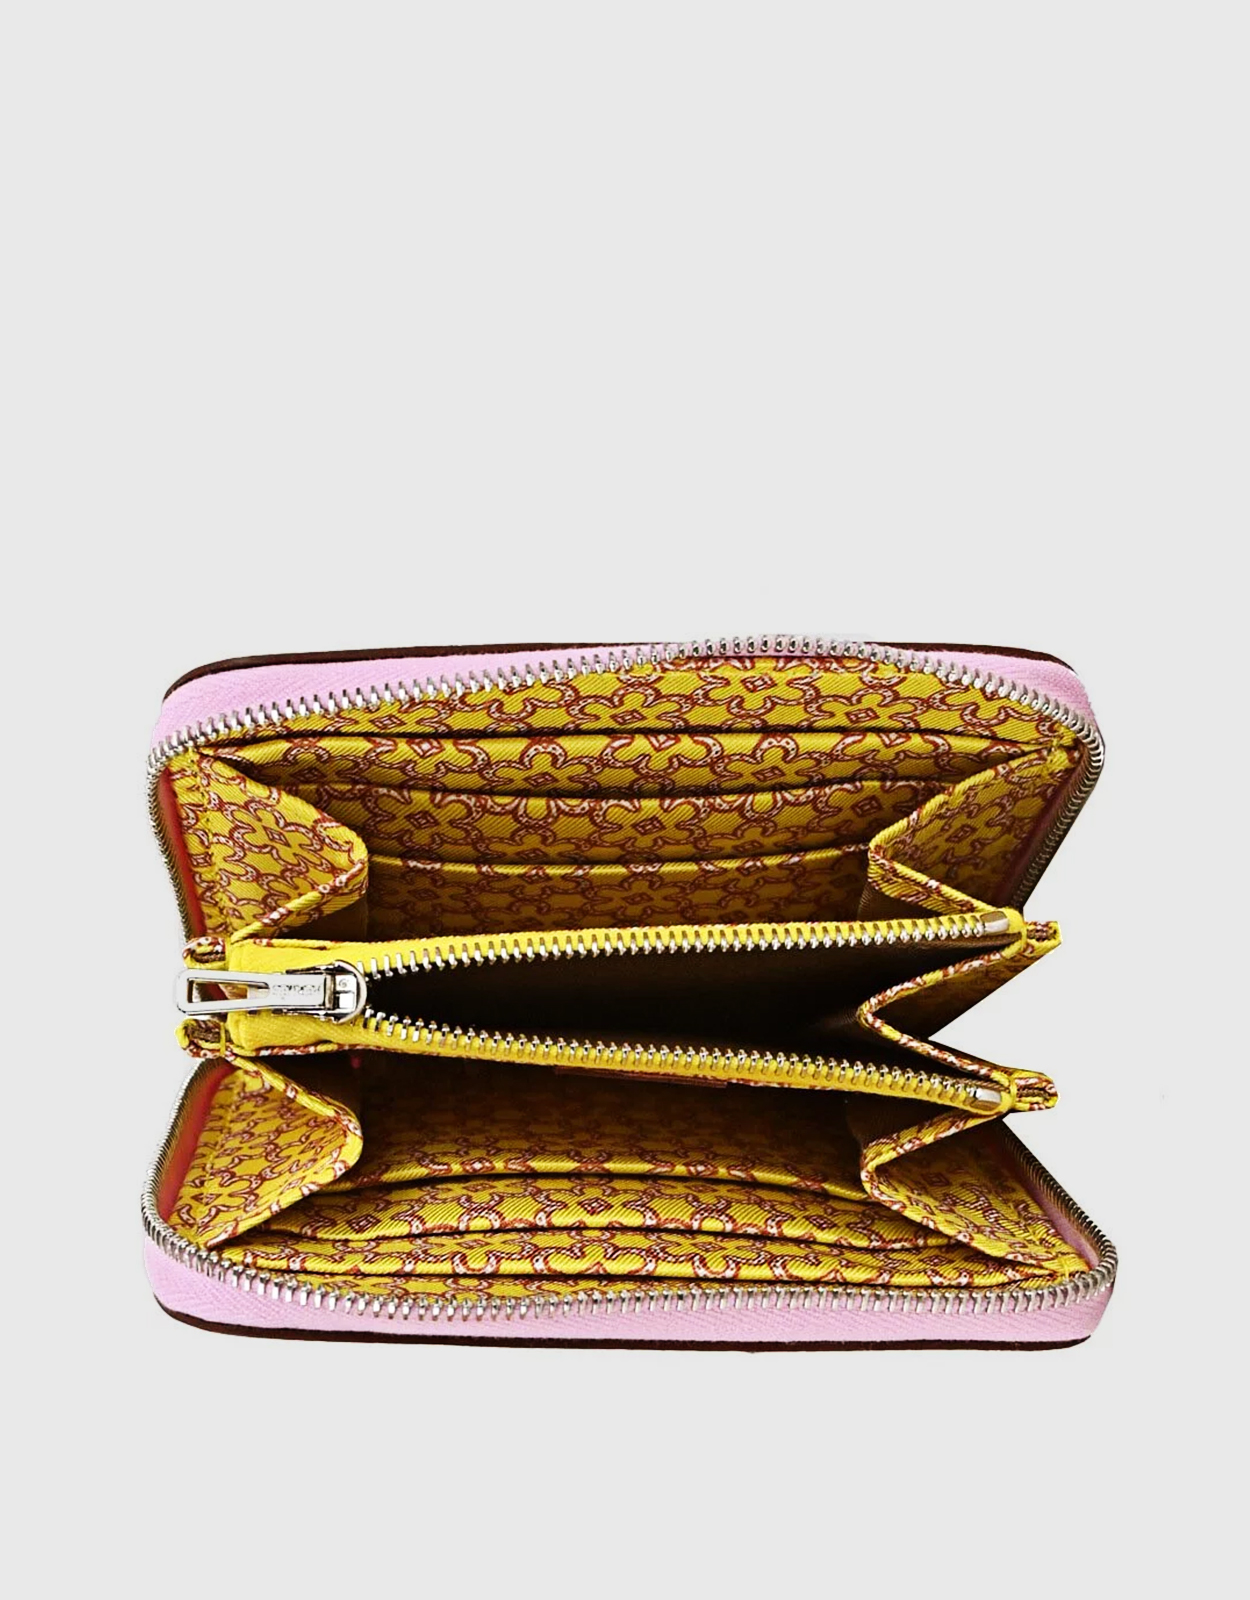 Hermès Hermès Silk'In Compact Epsom Leather Wallet-Mauve Sylvestre/Jaune  Citron/Cuivre (Wallets and Small Leather Goods,Wallets)